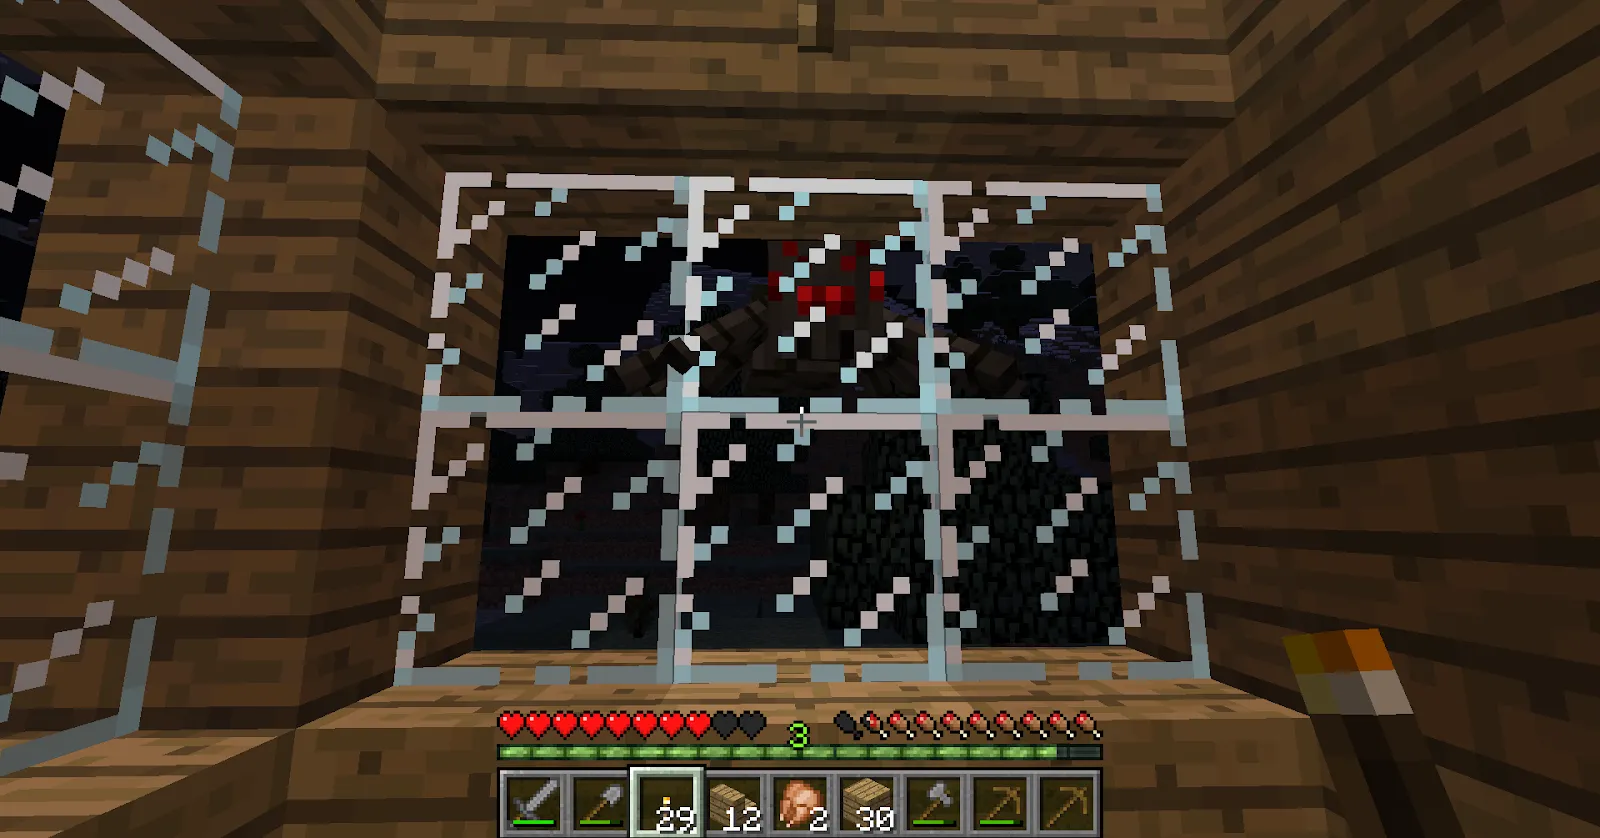 An image of a spider kept in a glass case in Minecraft